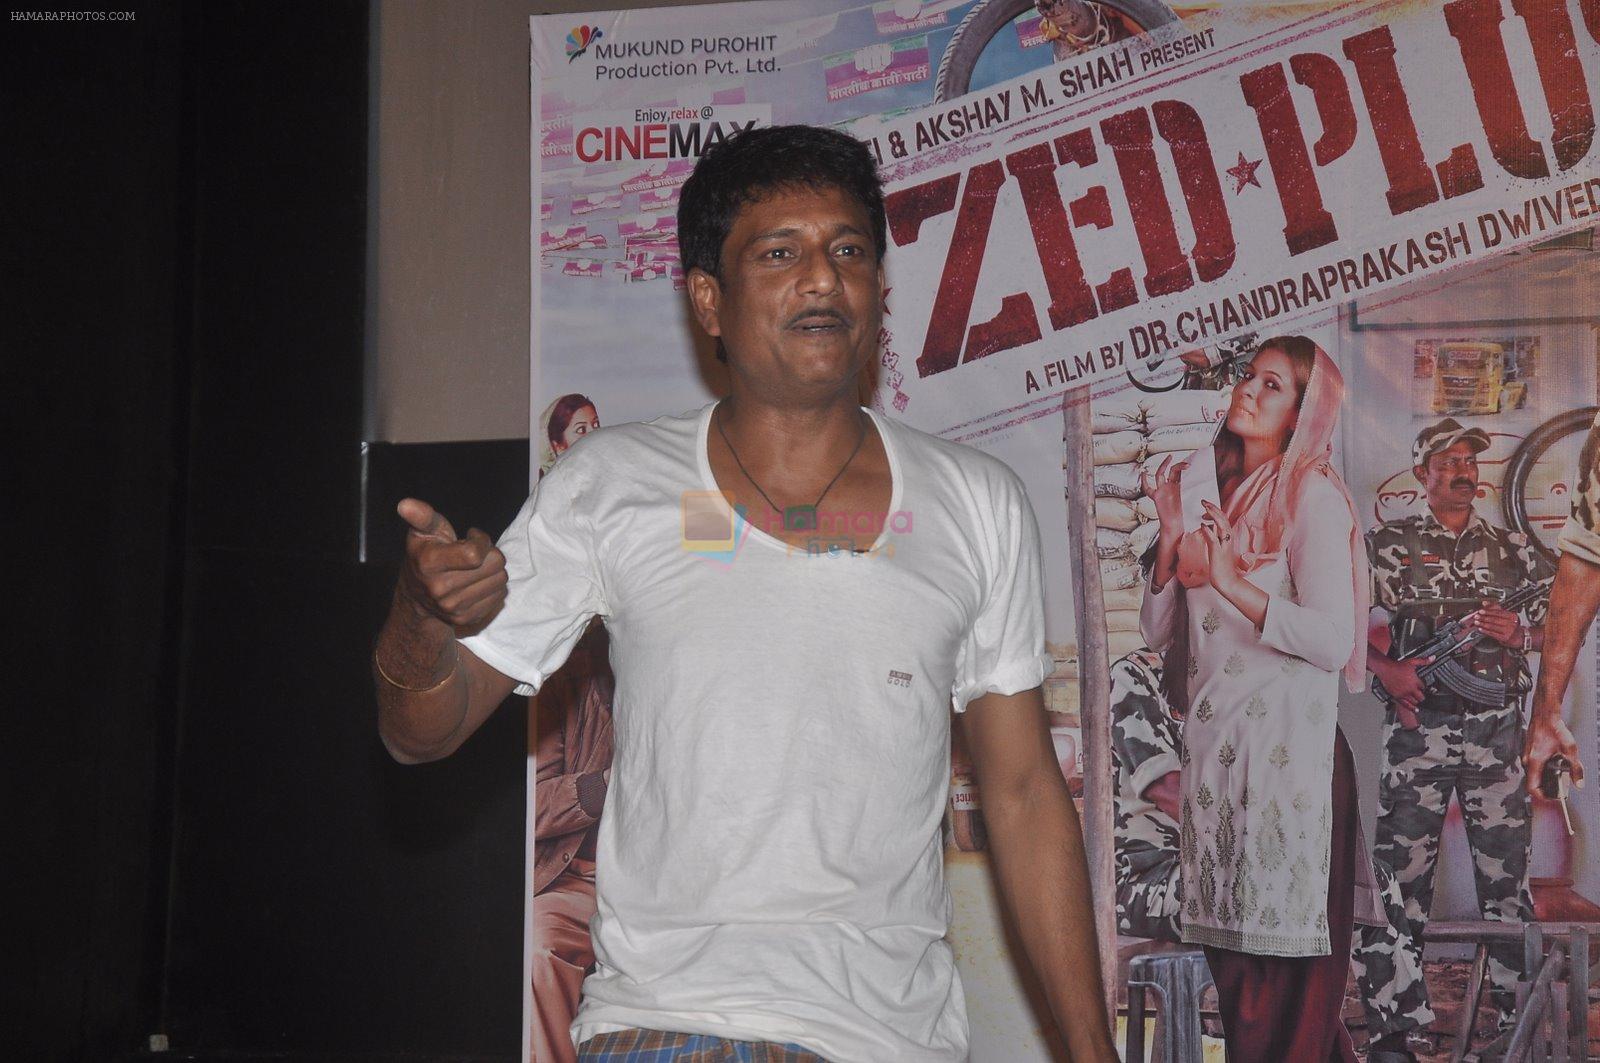 Adil Hussain at Zed Plus film launch in Cinemax on 11th Oct 2014